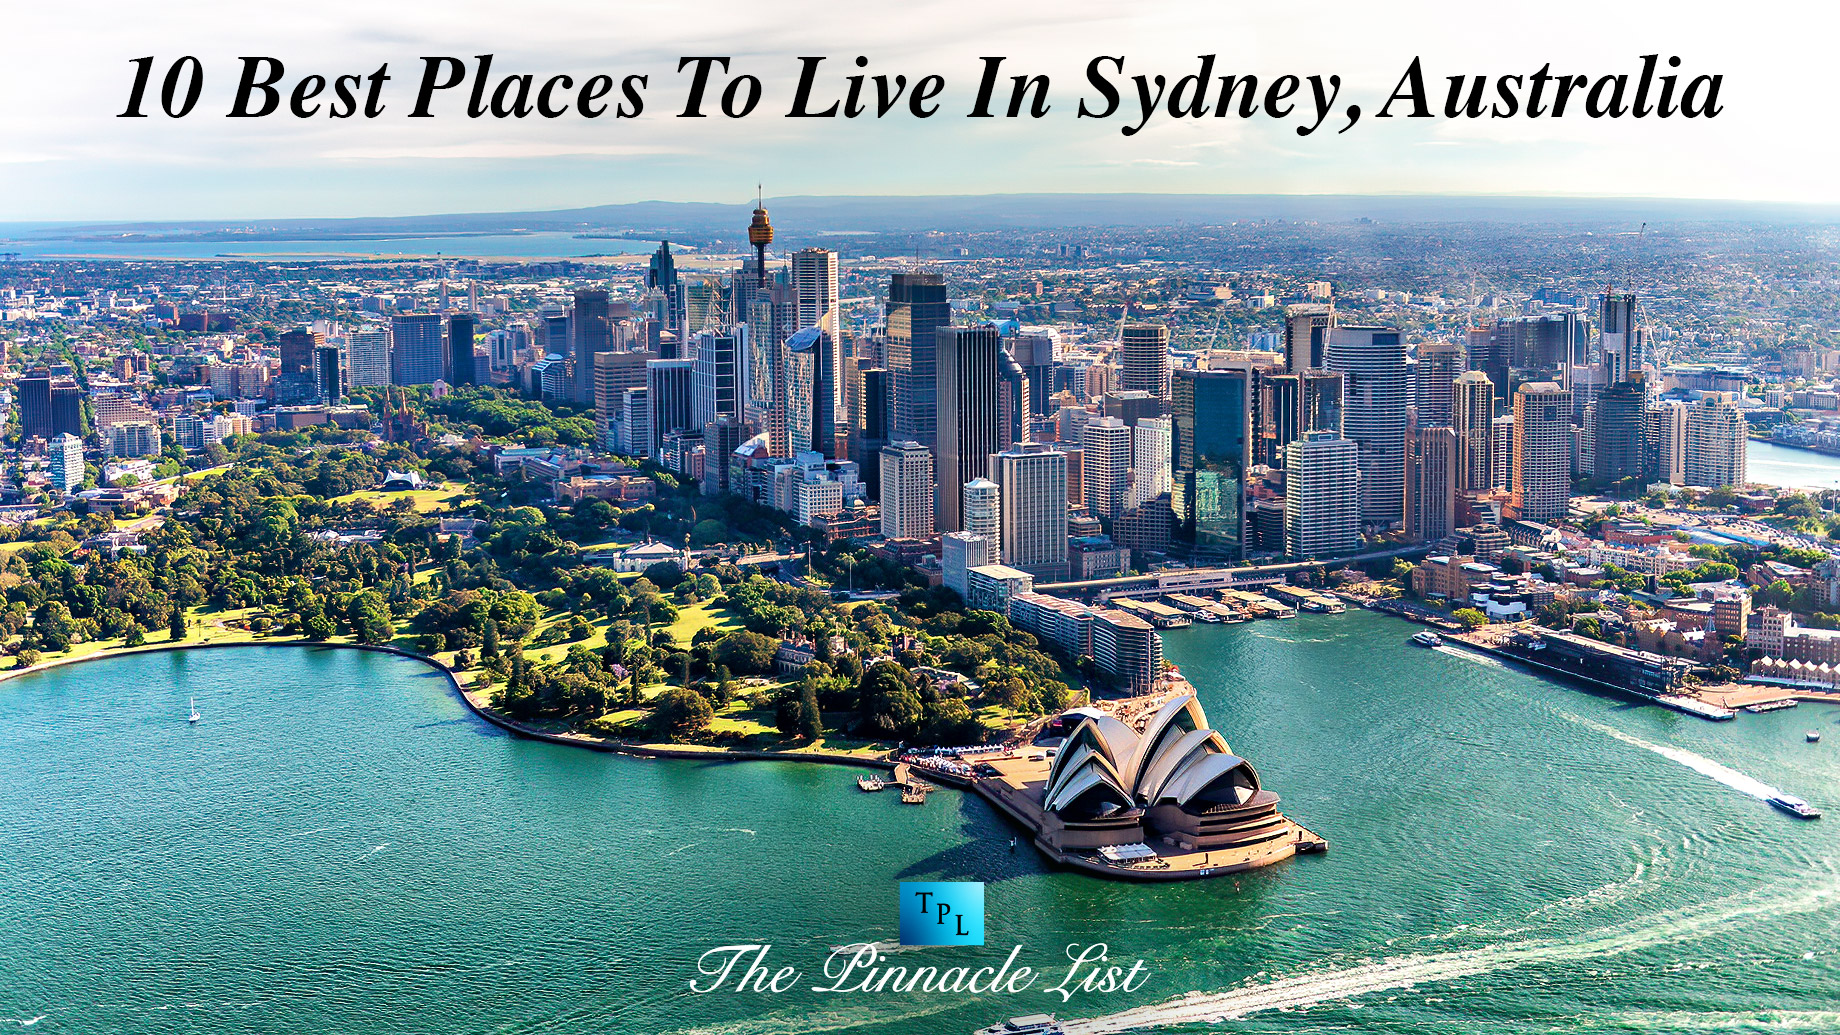 10 Best Places To Live In Sydney, Australia